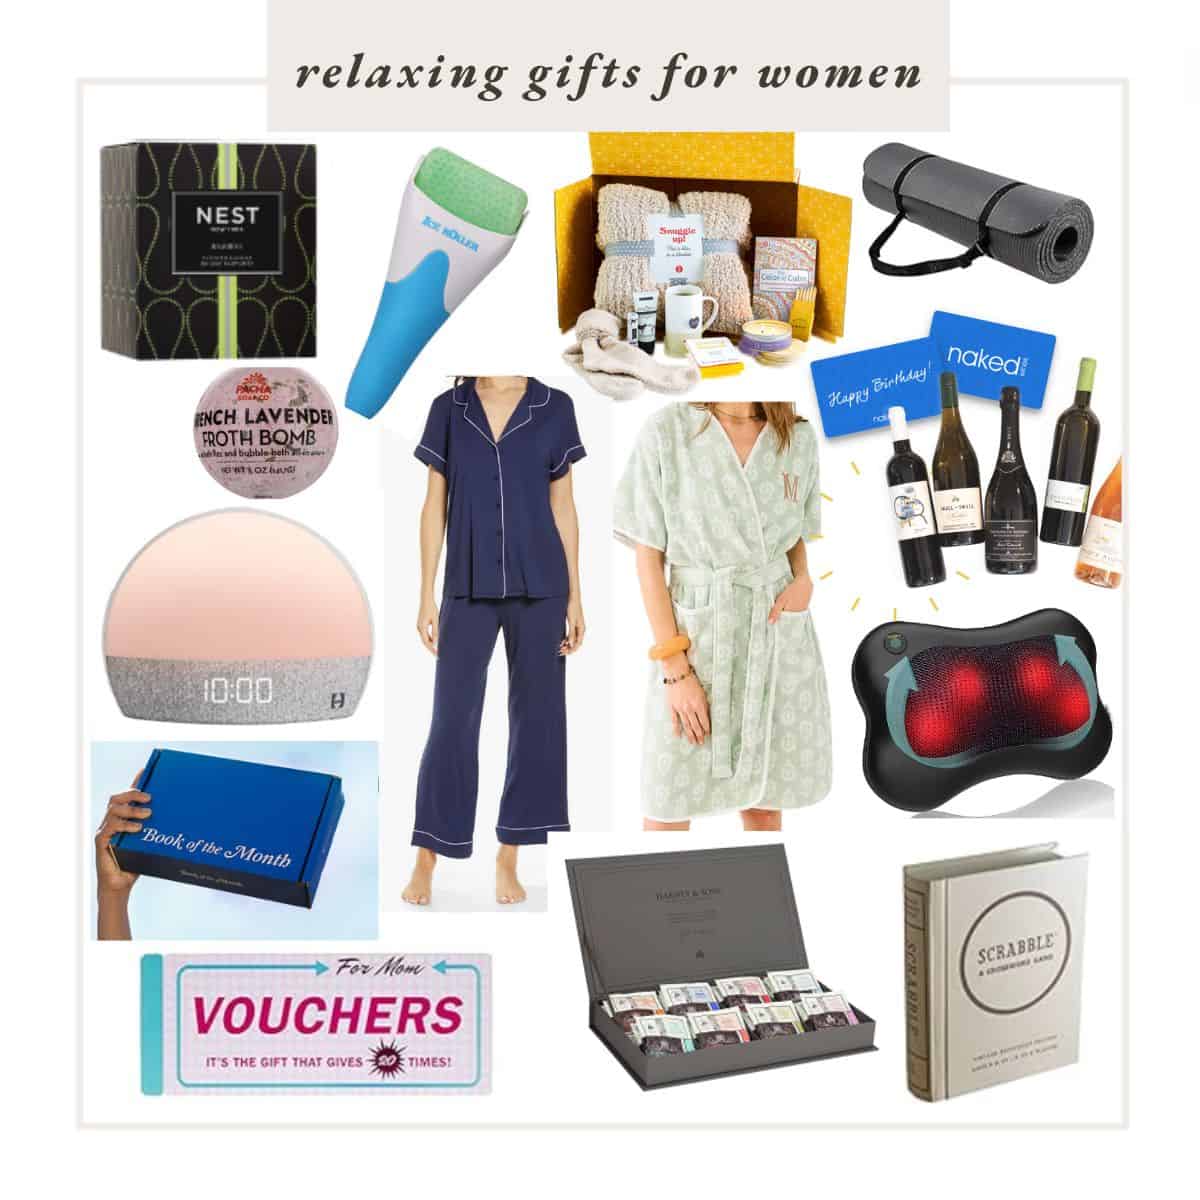 25 Most Relaxing Gifts for Women to Pamper Her